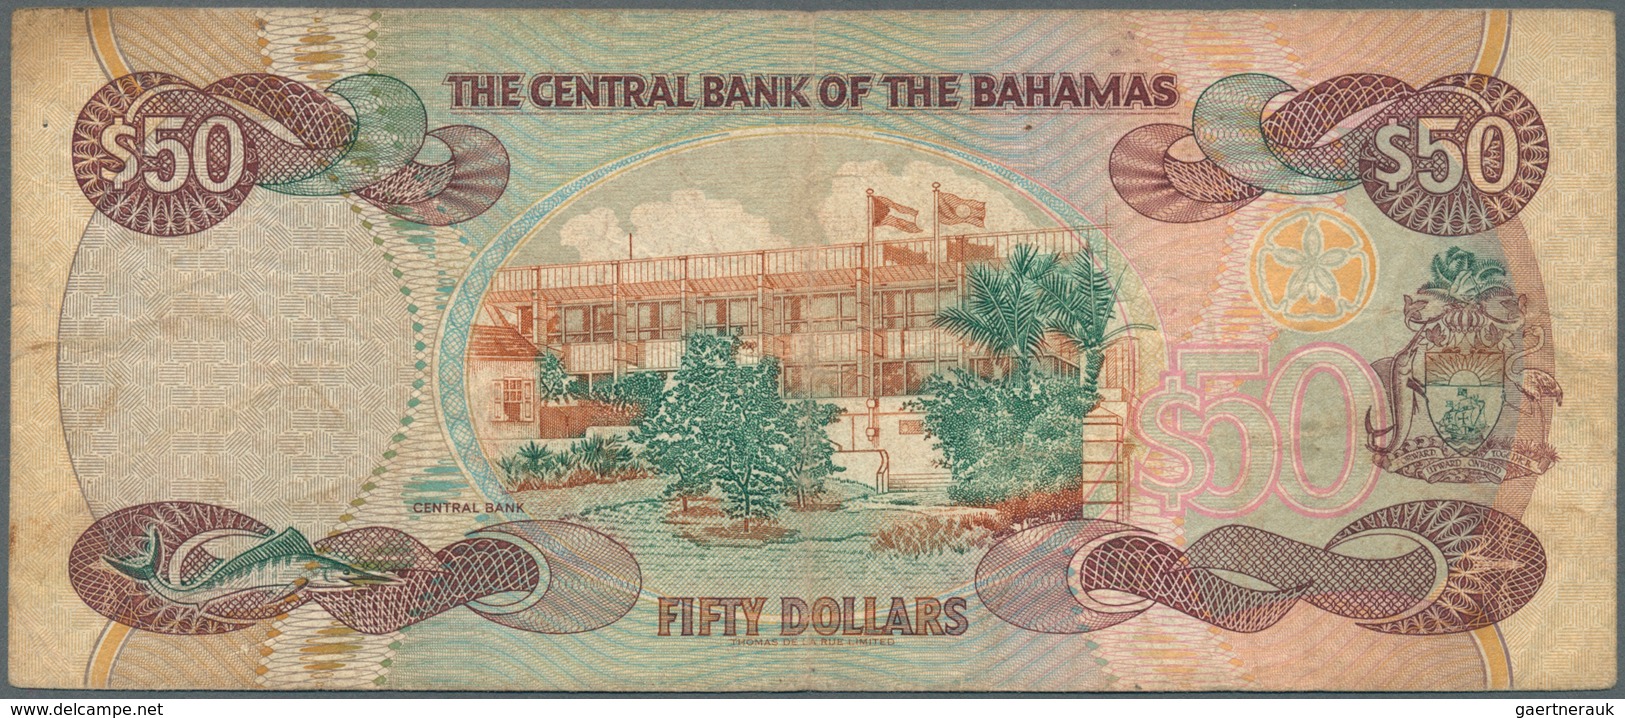 01103 Bahamas: 50 Dollars 1996 Key Note P. 61 In Used Condition With Folds And Creases As Well As Light St - Bahamas